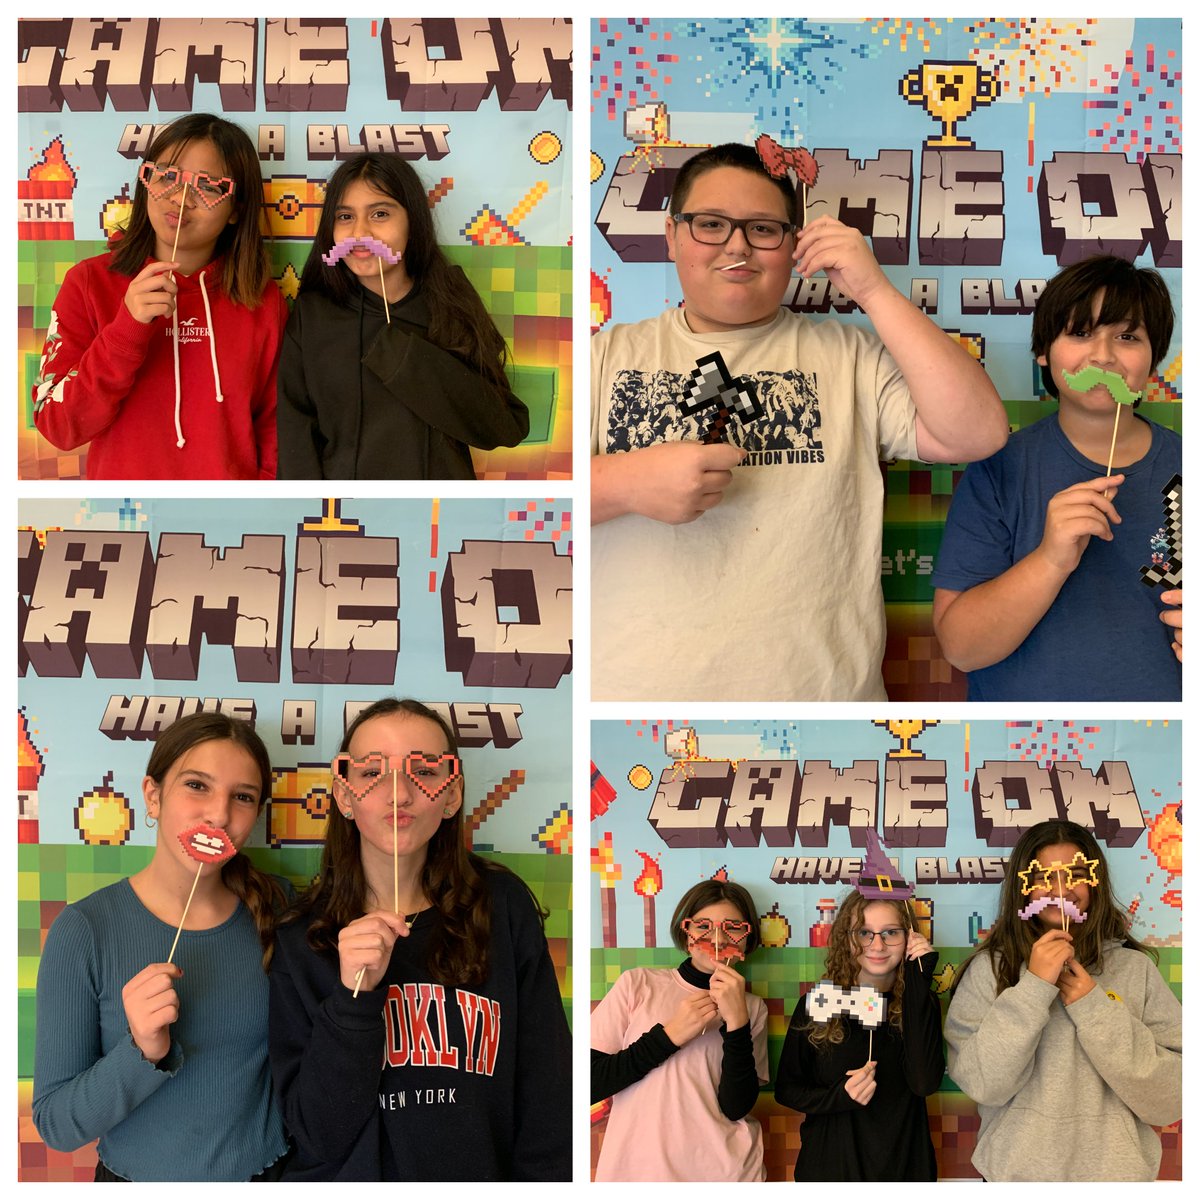 So much fun during our Arcade Day celebrating days and days of hard work! Students were able to play all of their teamates' games while enjoying some photo ops! @Bloxels1 @OMS_NY @MrsFWasserman #bloxels #gameon #middleschoollibrary #middleschool #saycheese @Mrs_Lupia_